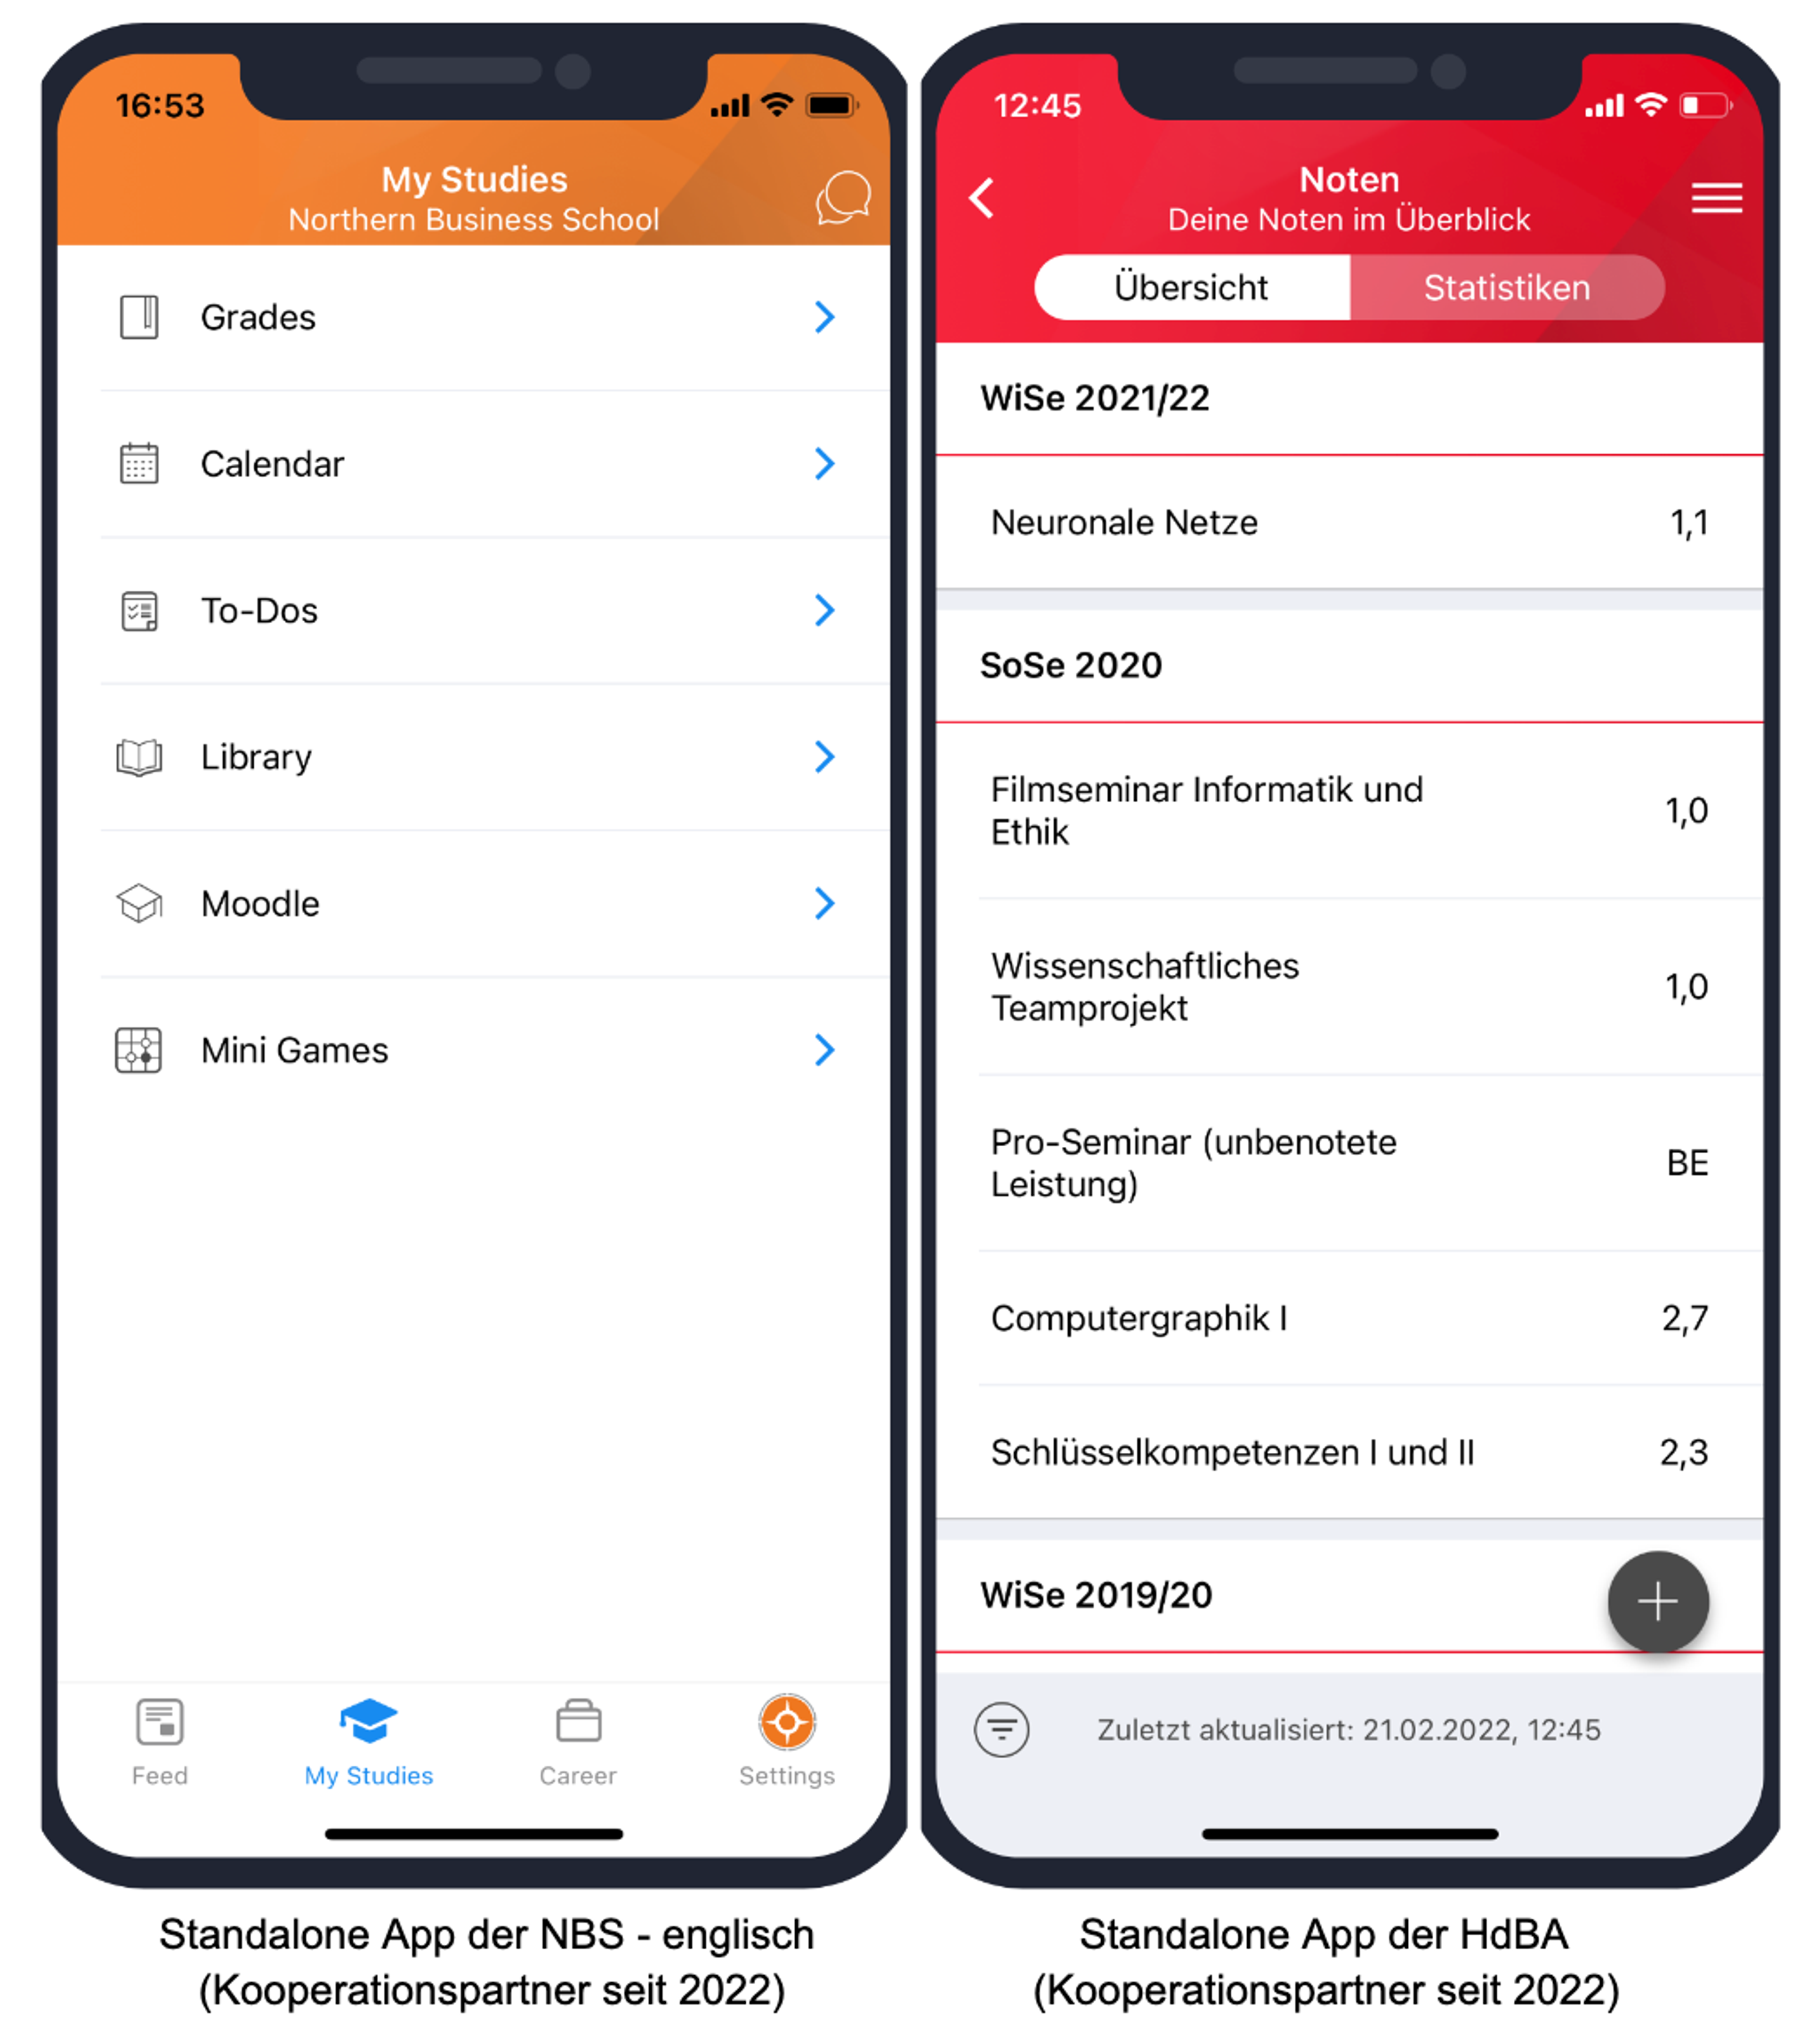 NBS and HdBA standalone apps 